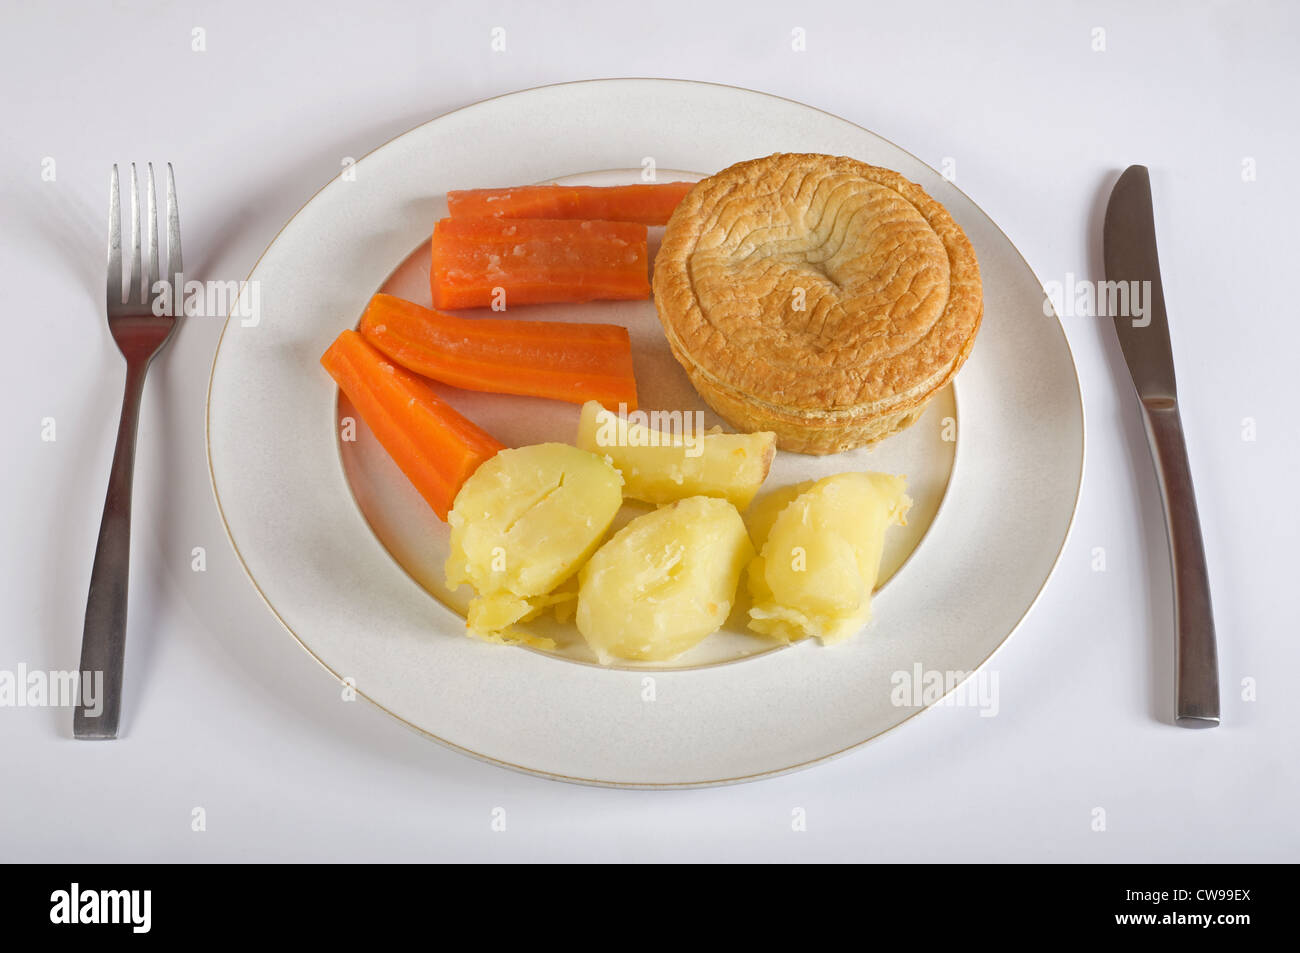 Meat pie carrots and boiled potatoes Stock Photo